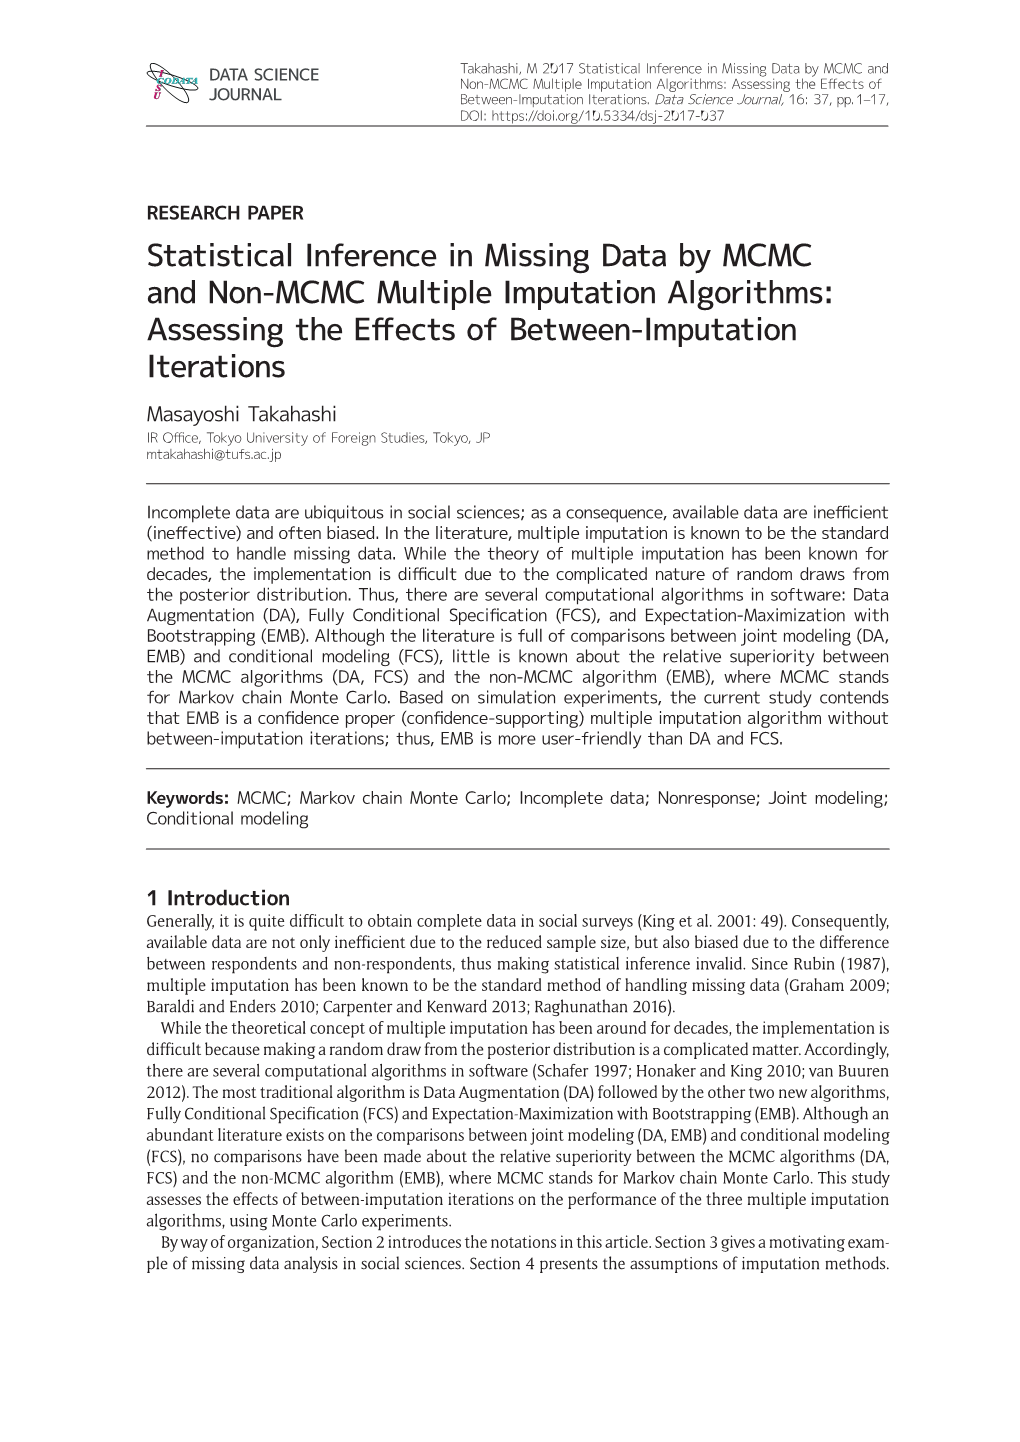 Statistical Inference in Missing Data by MCMC And